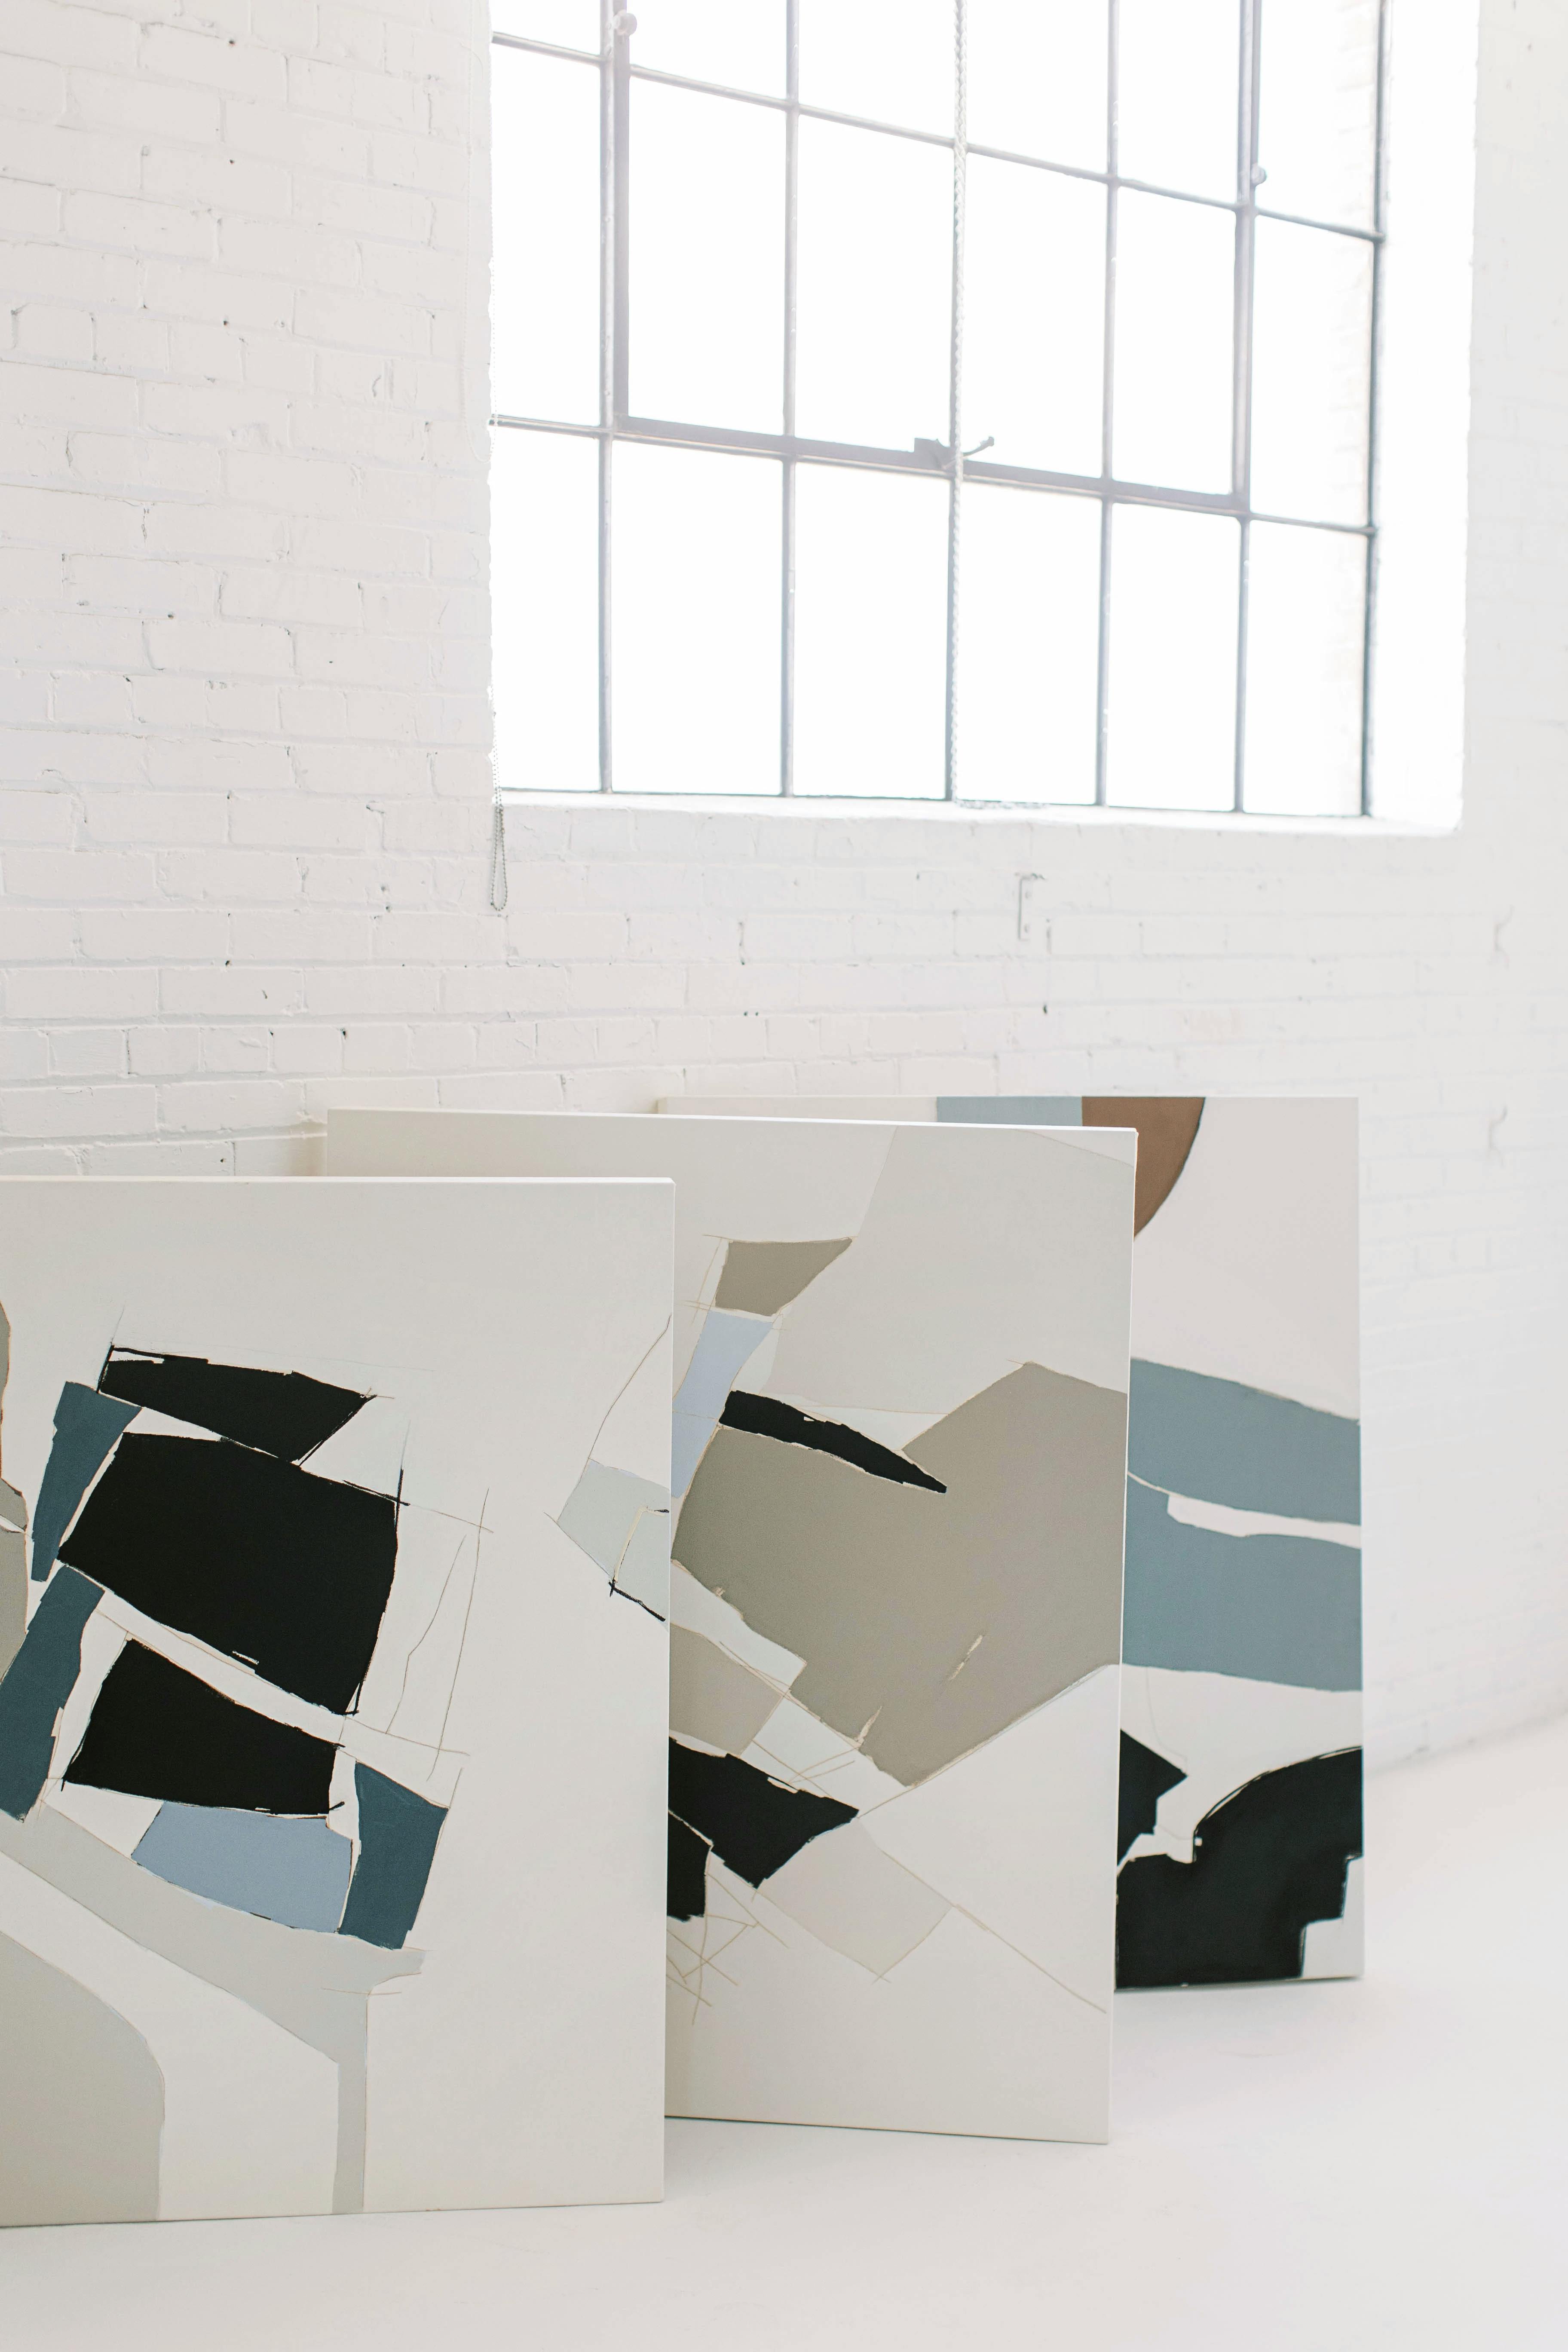 Three abstract, geometric paintings by artist Holly Addi in her white brick studio.